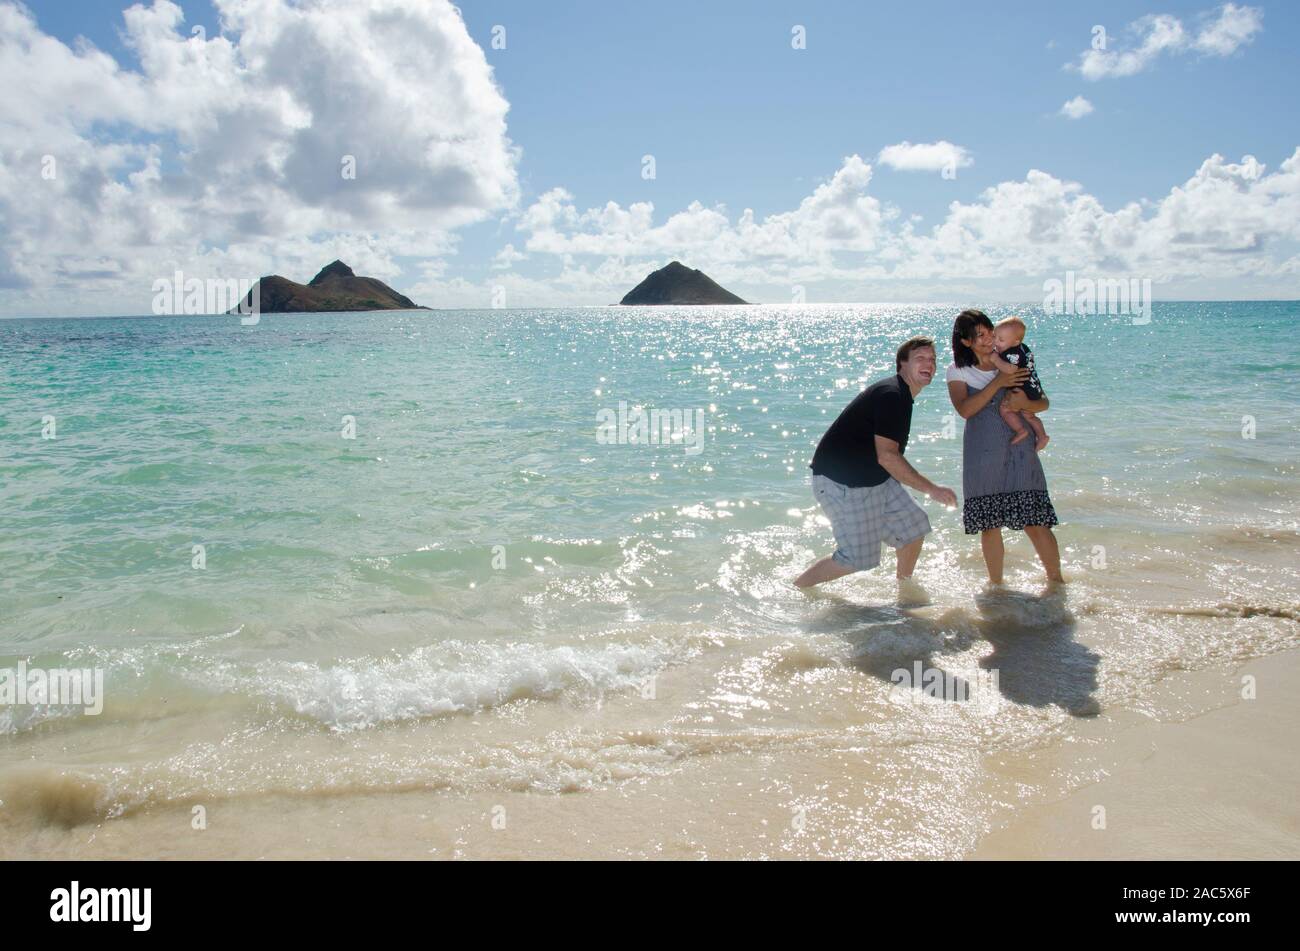 A family of three enjoying each other at Lanikai Beach, O'ahu, with the Mokulua Islands in the distance. Stock Photo